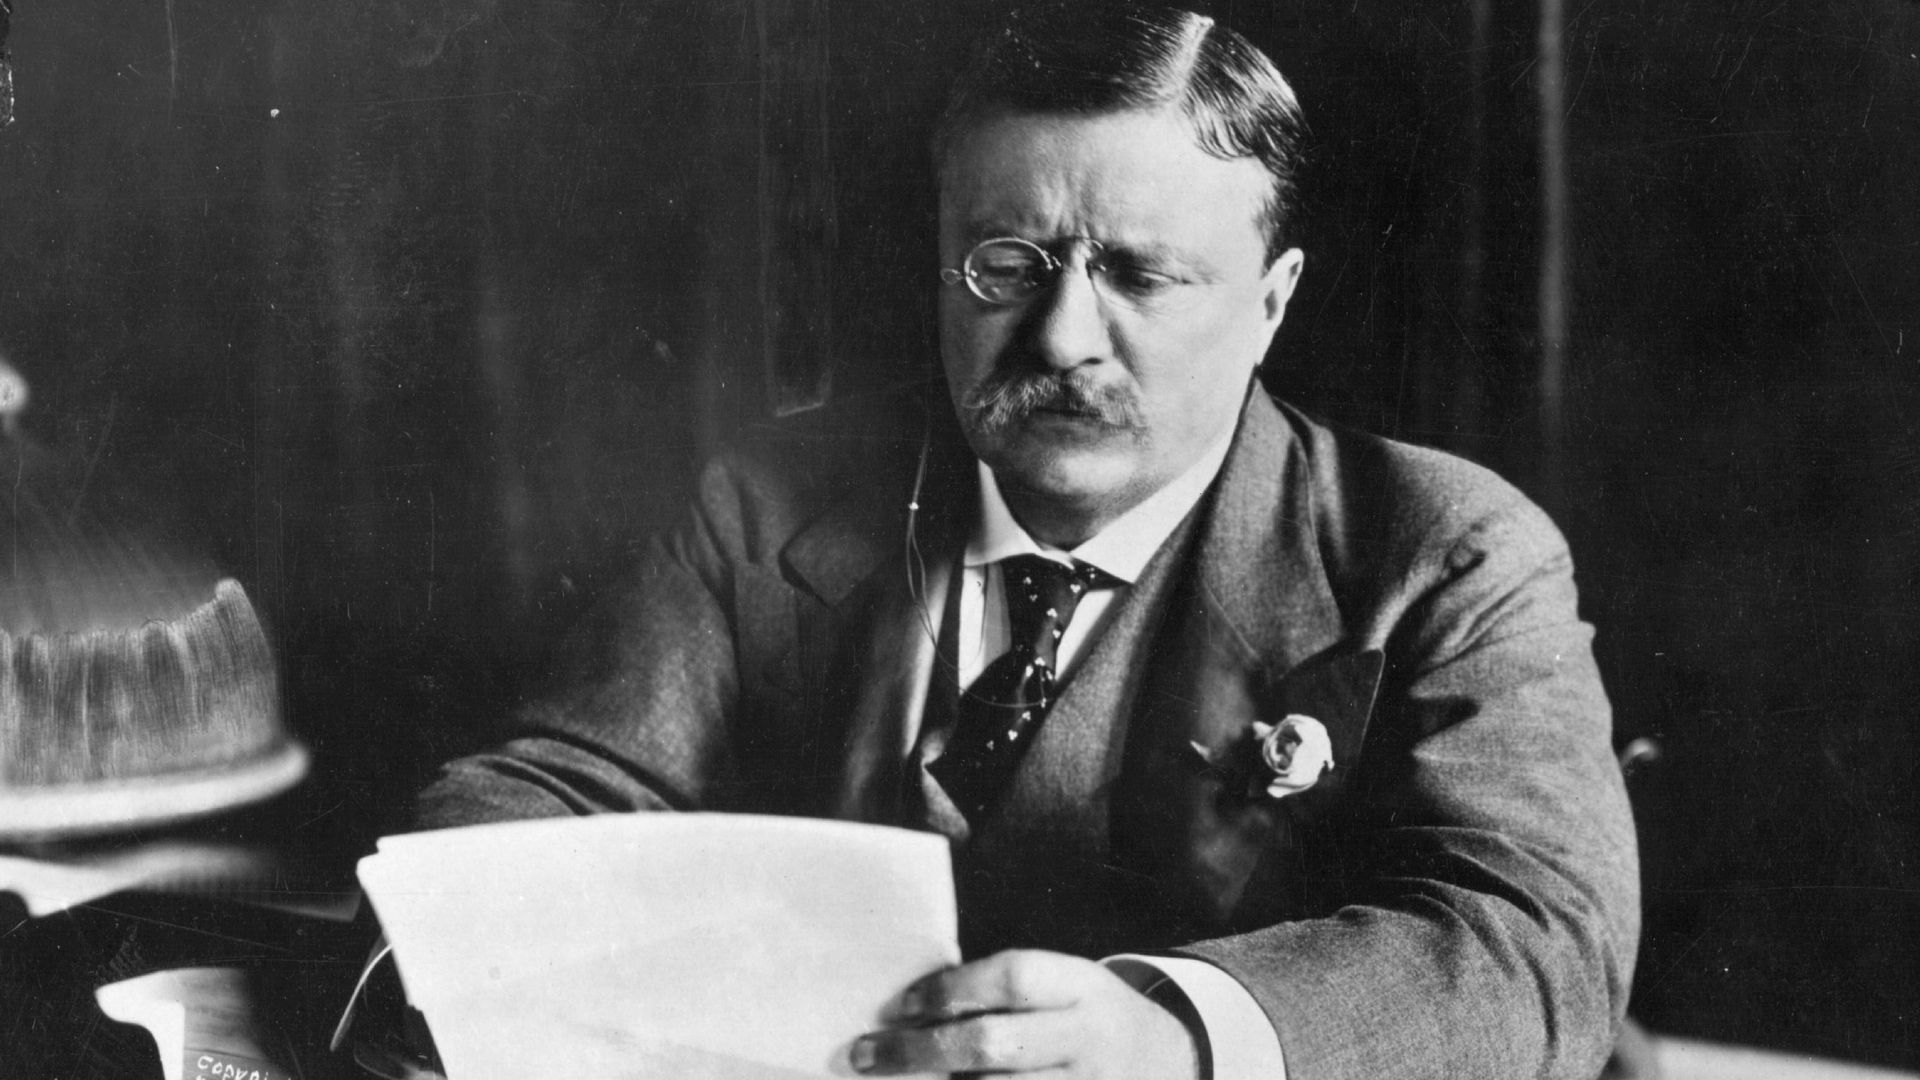 Photo of Theodore Roosevelt reading papers